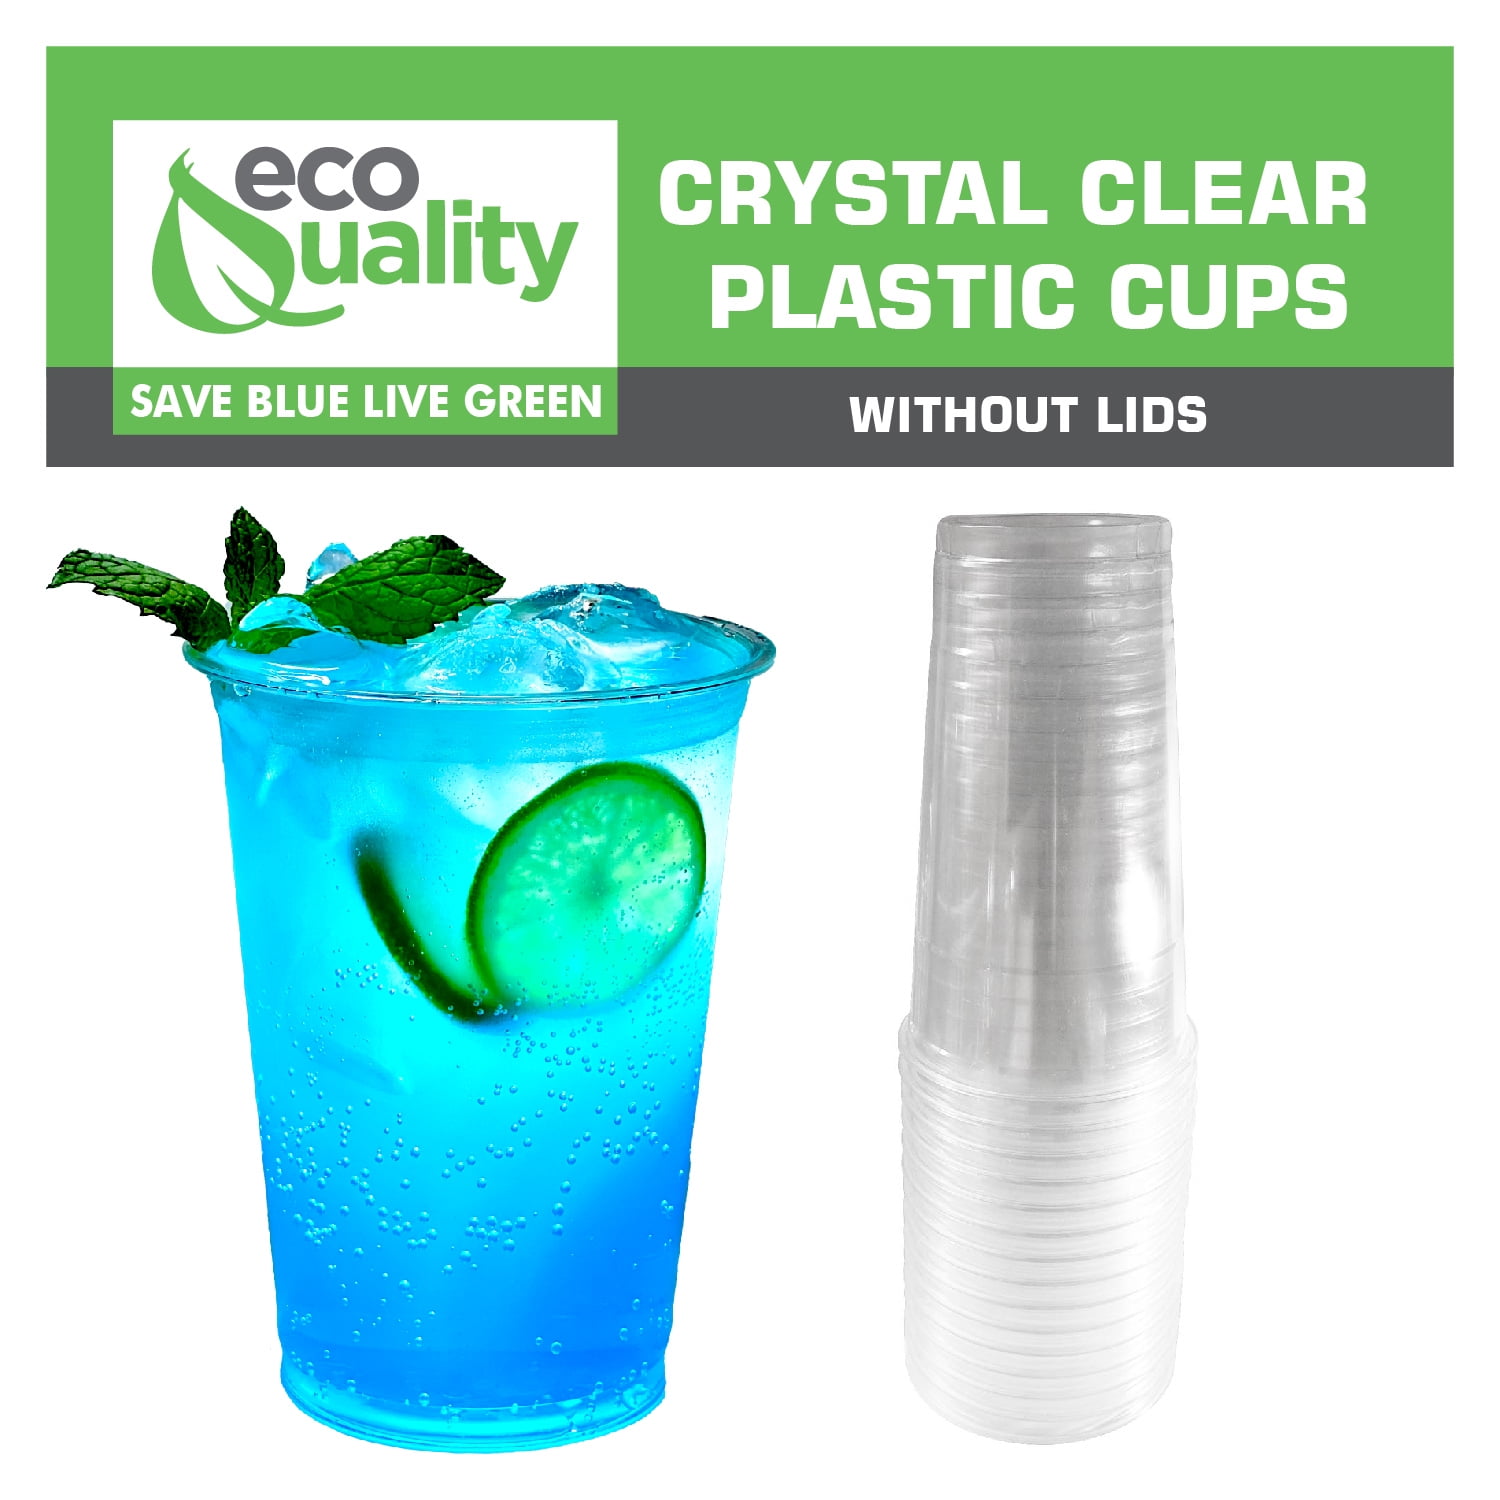  Clear Soft Plastic Cup with Lid - 16 oz. 162958-16-L